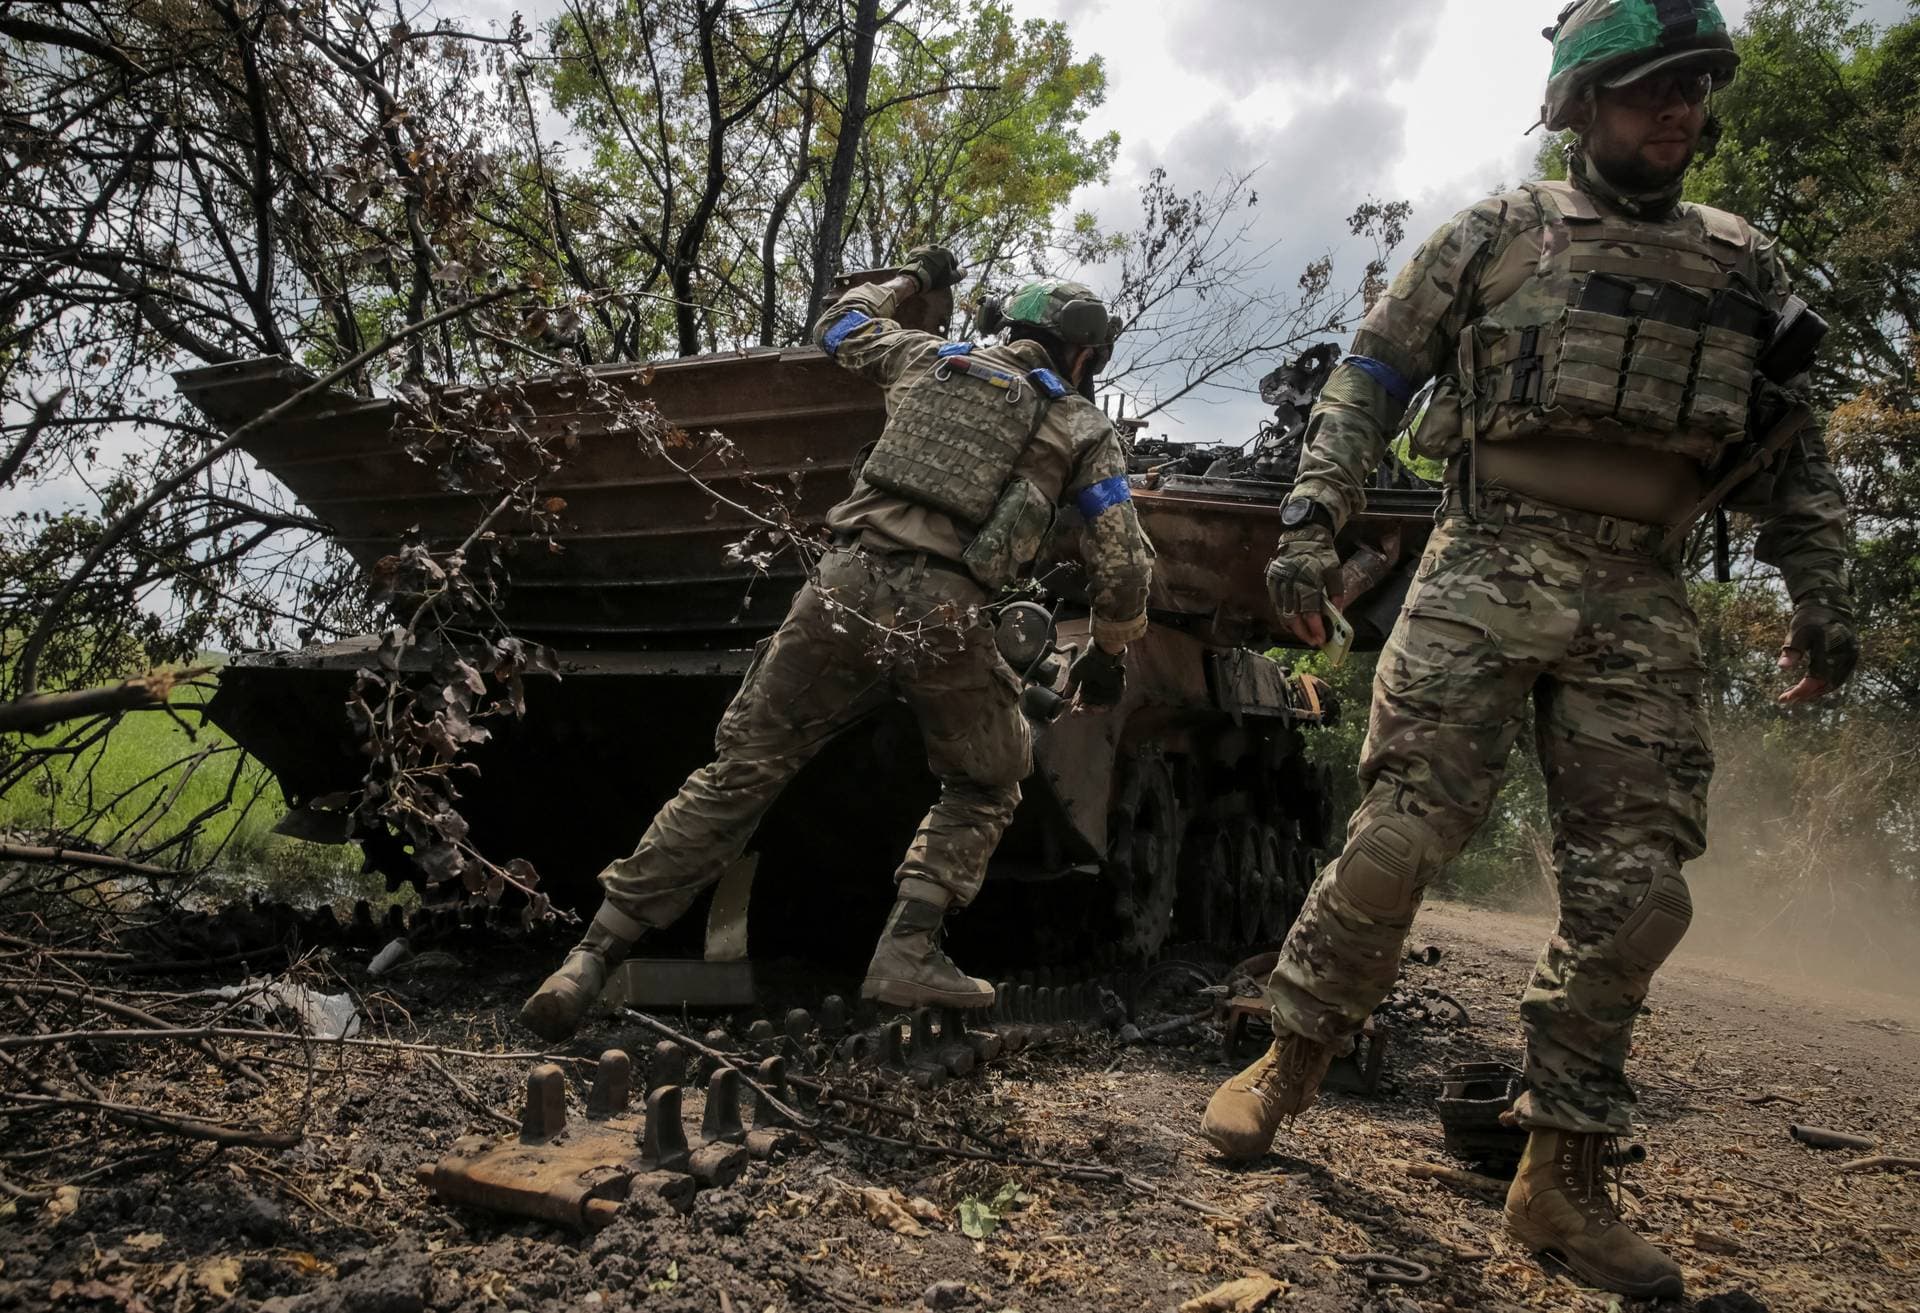 Ukrainian service members check a destroyed Russian a BMP-2 infantry fighting vehicle near the front line in the newly liberated village Storozheve